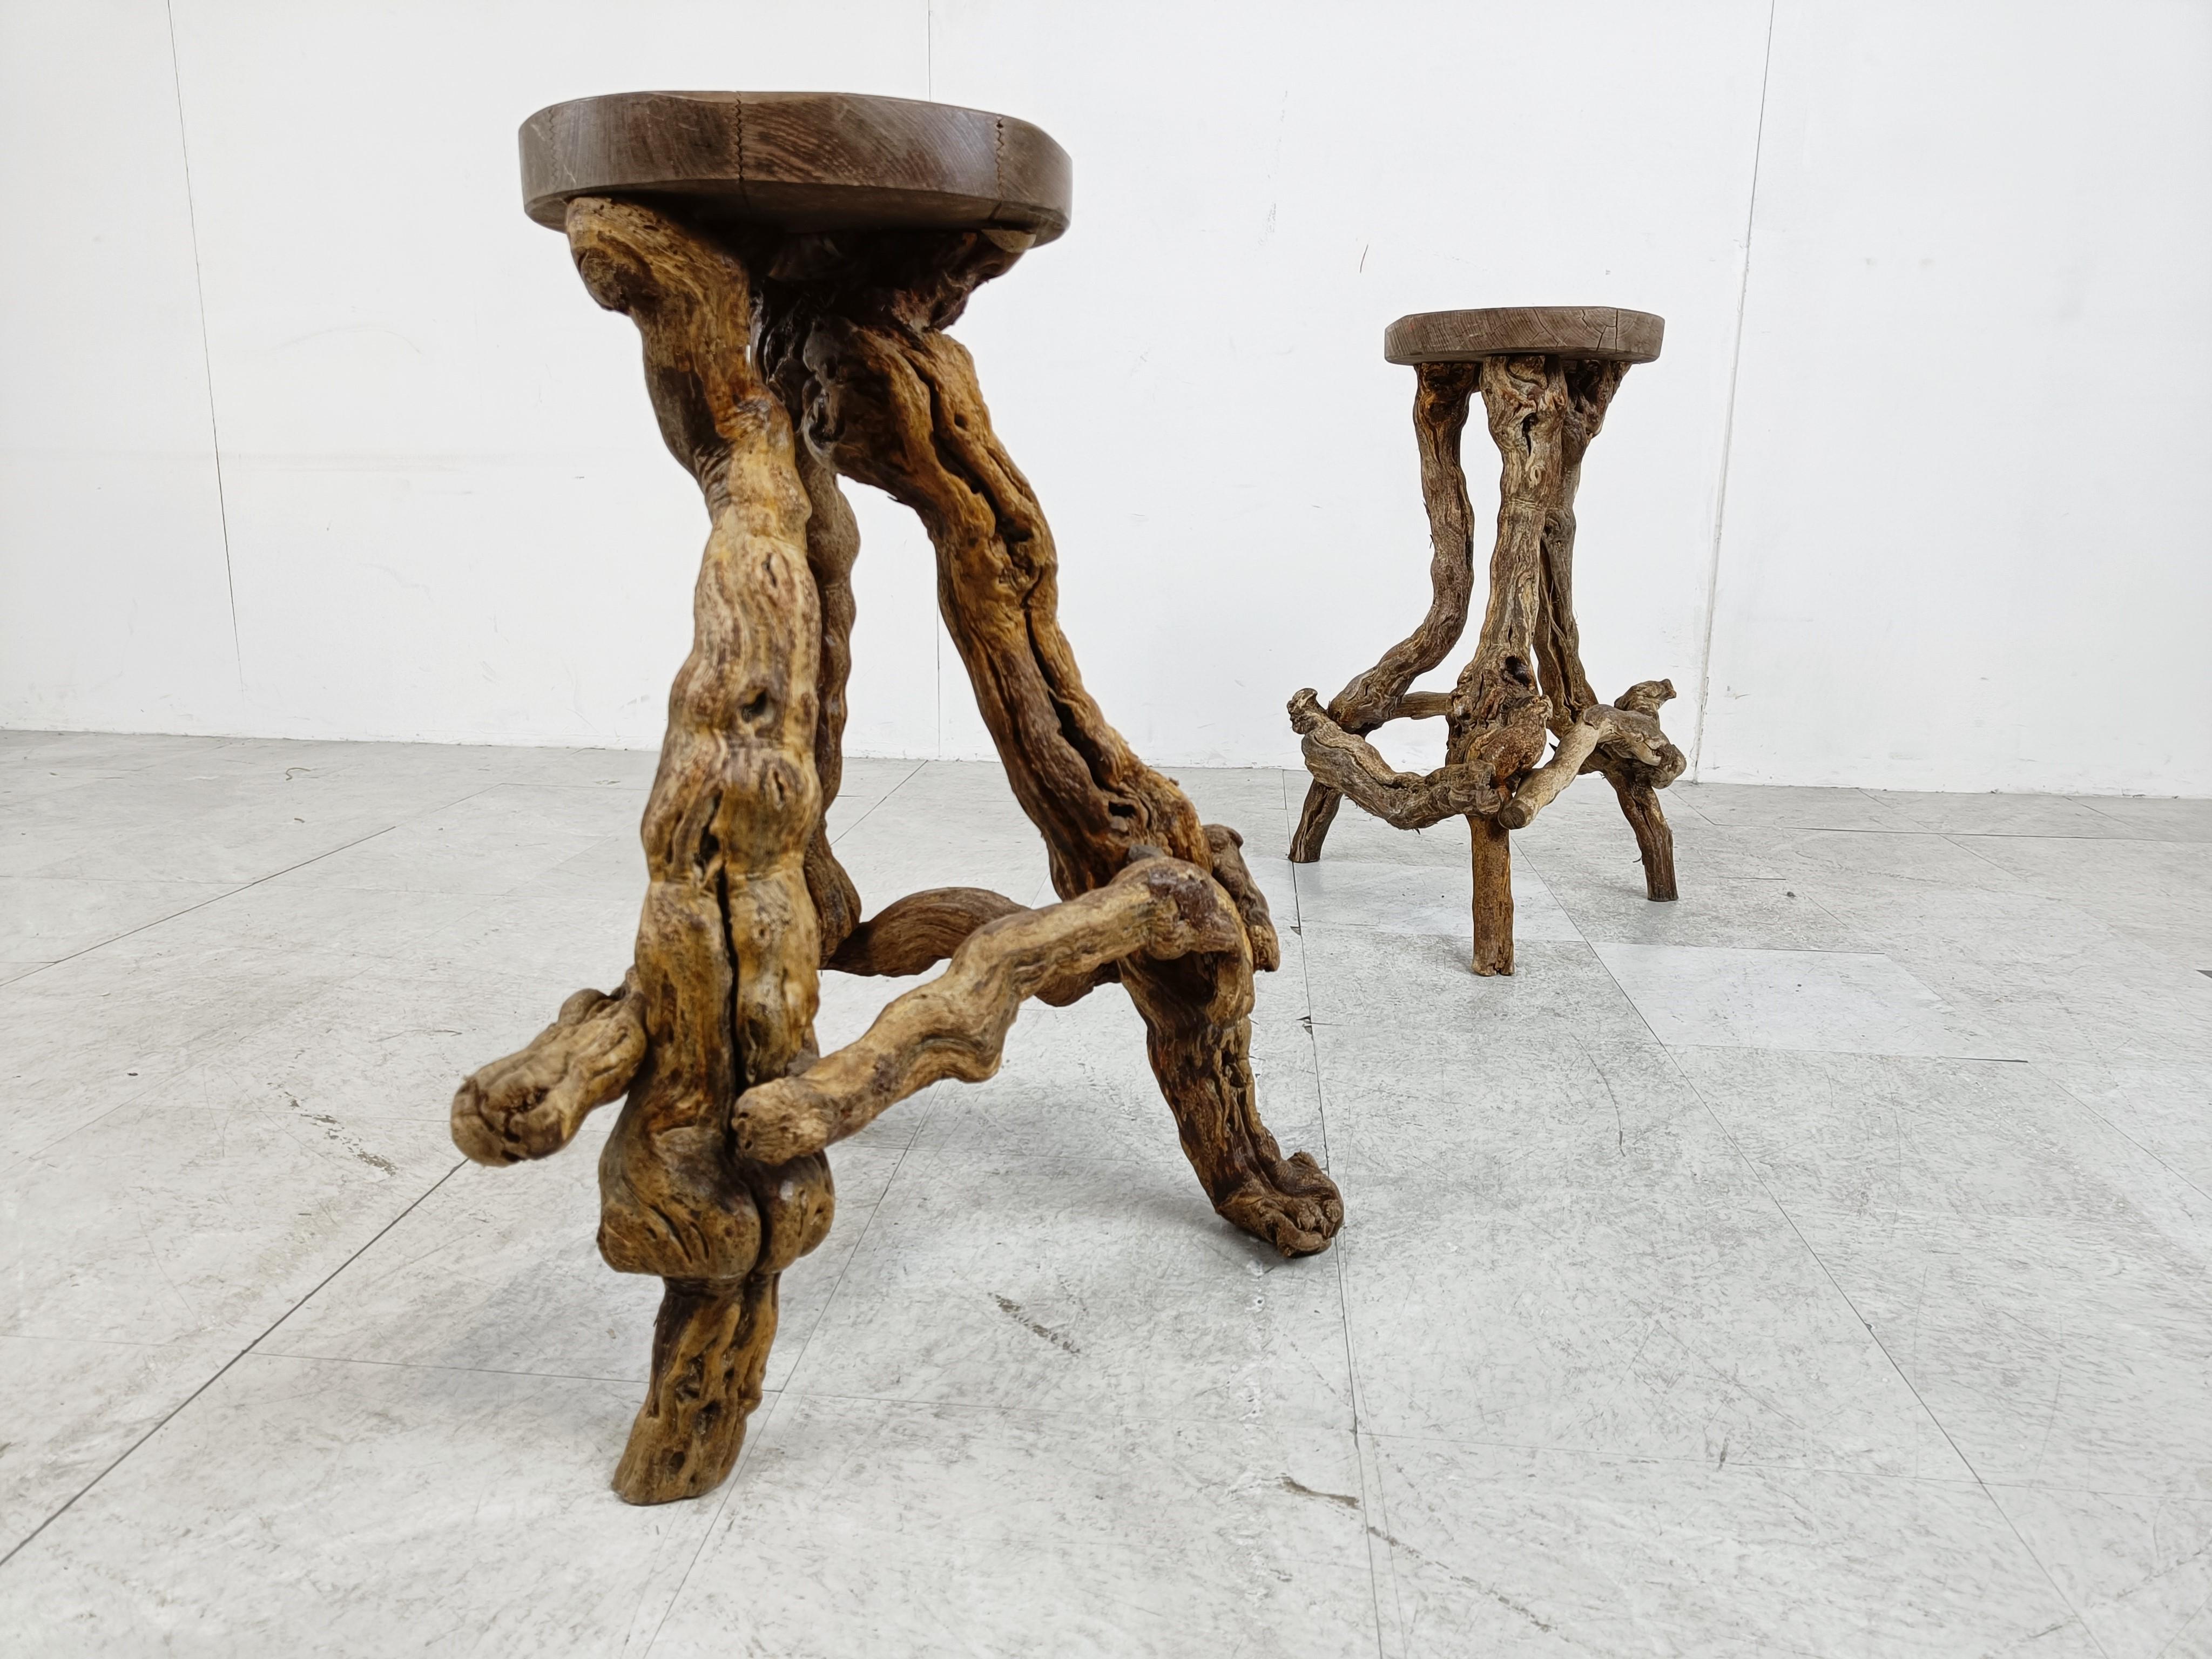 Up for sale is this rather unique bar counter made from vinewood branches with beautiful matching stools.

This sculptural bar counter can ideally be used as a wine tasting bar and is very decorative.

1950s - France

Good